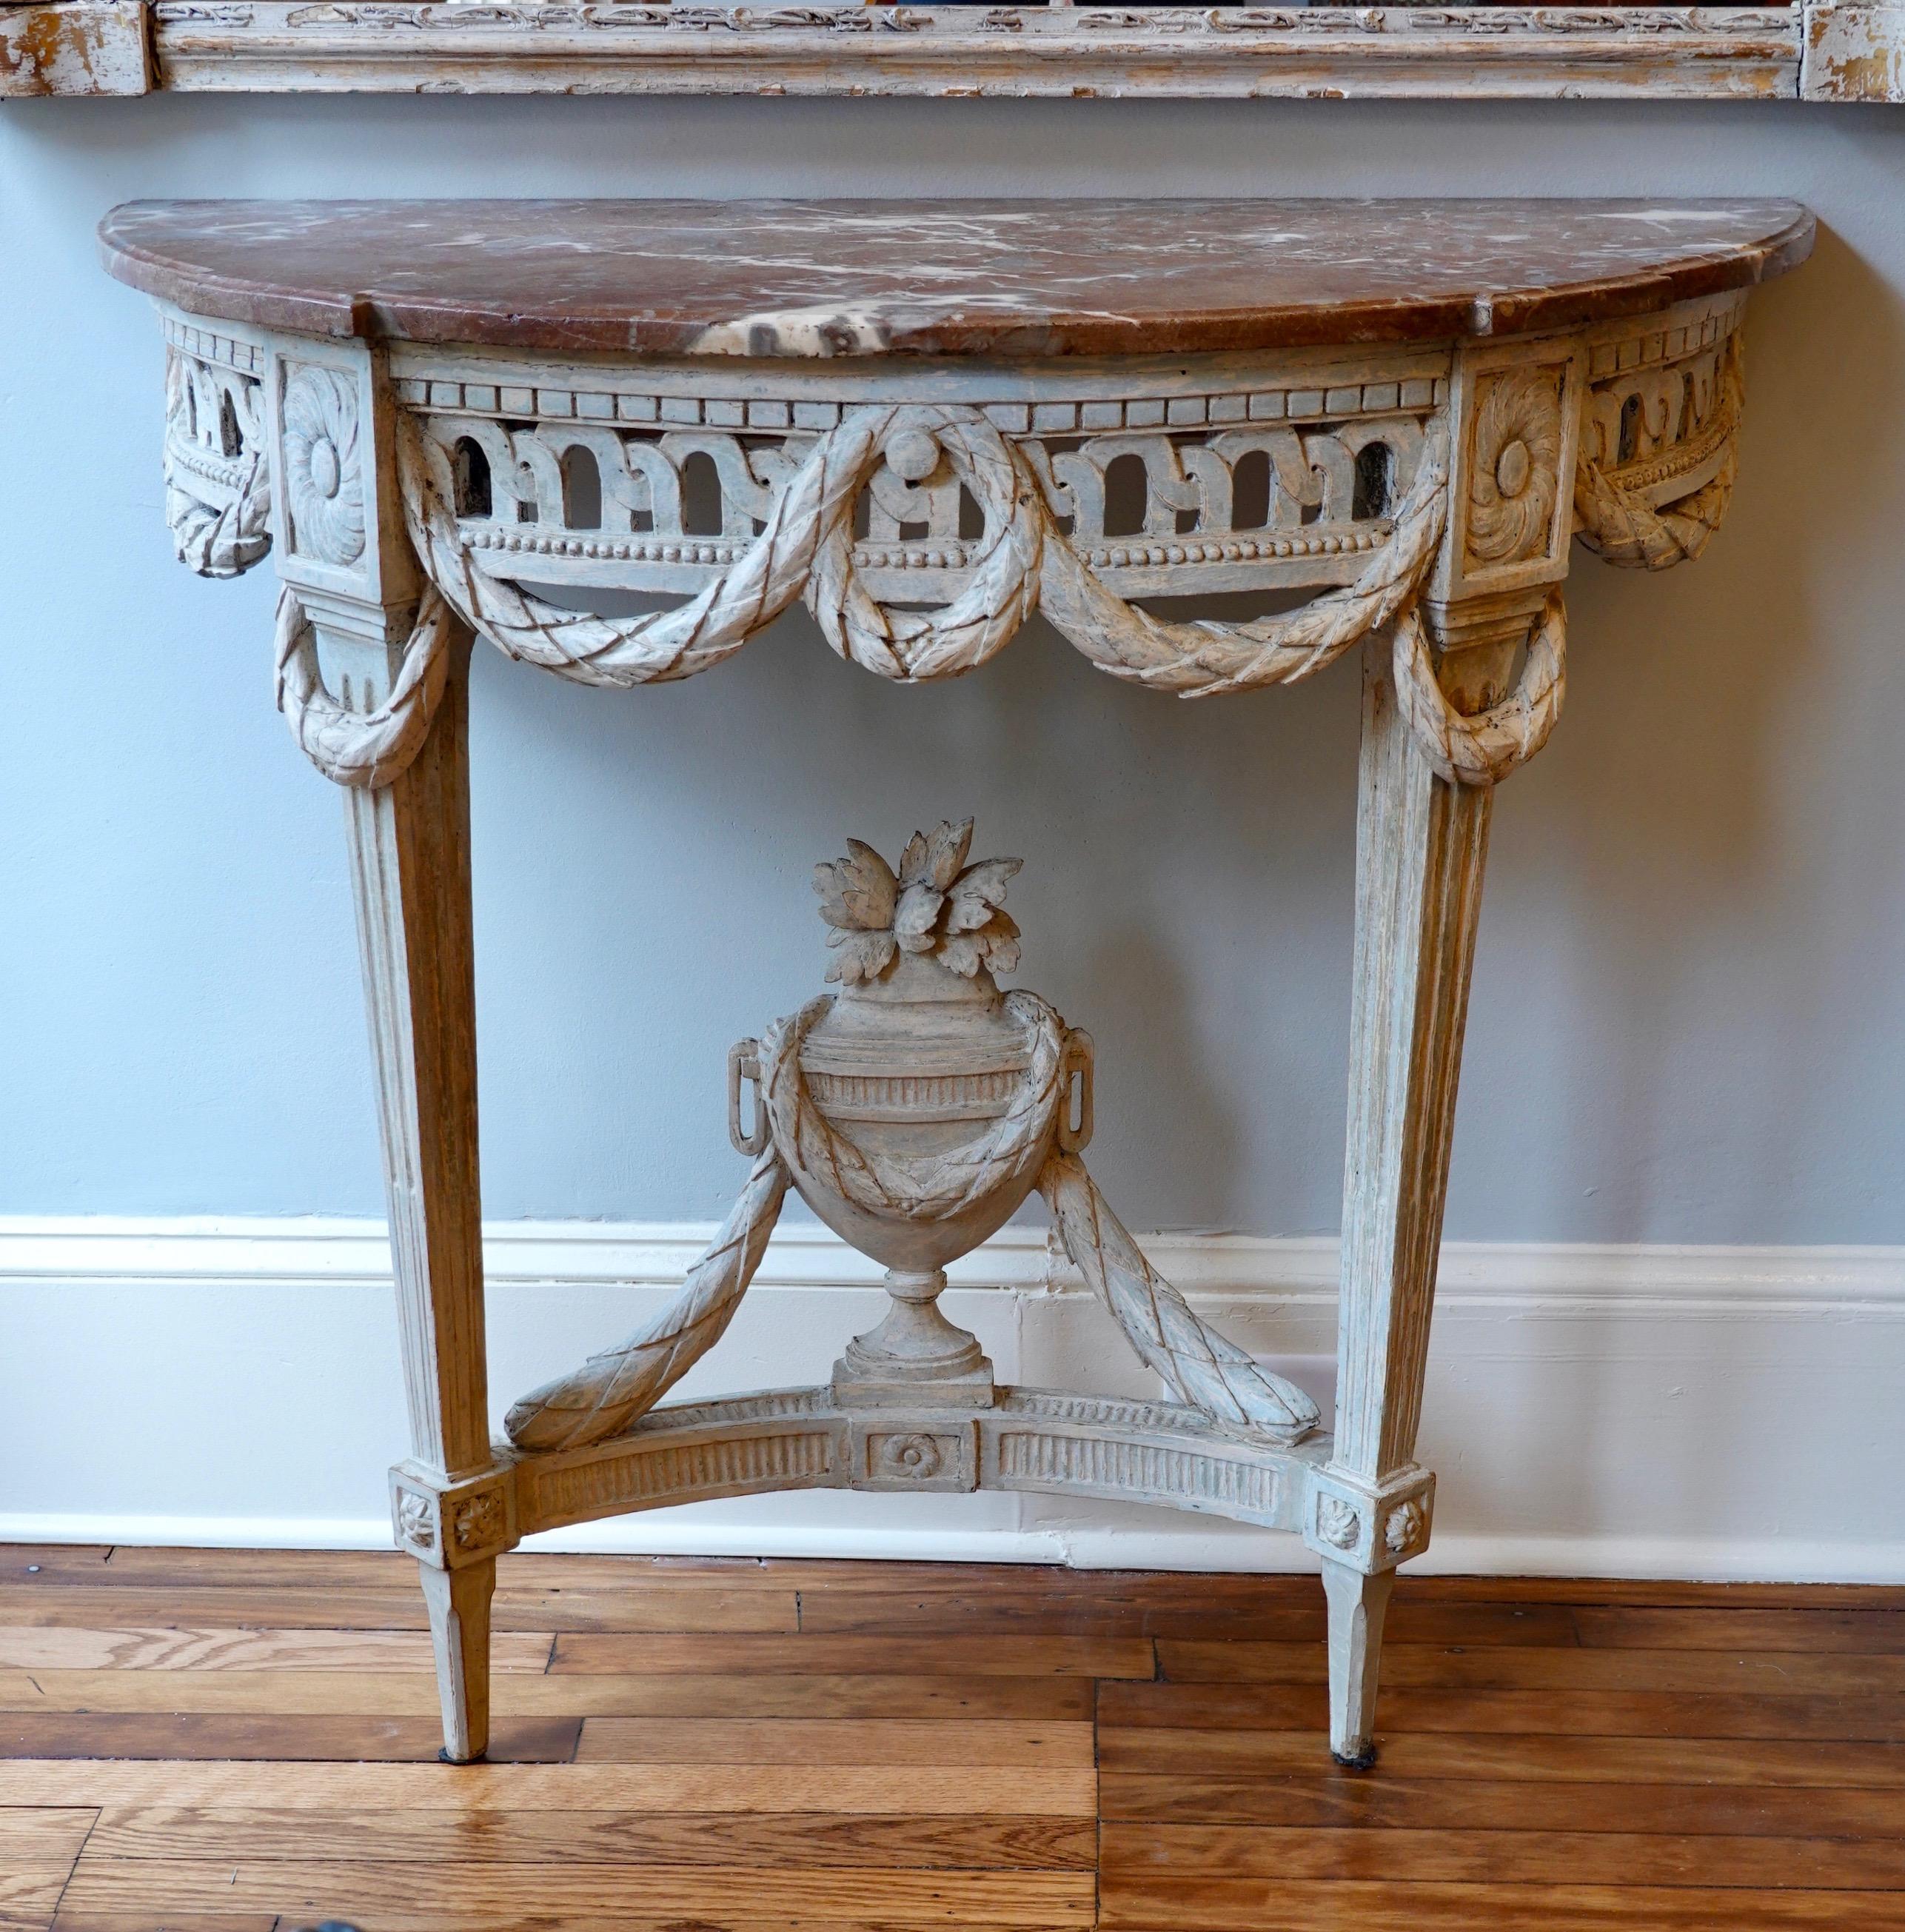 Lovely Louis XVI period white-painted console table (18th century) with pierced apron ornamented with swags, rosettes on joints, and large urn with flowers and swags on stretcher with other neoclassical details (circa 1780). Very pretty, variegated